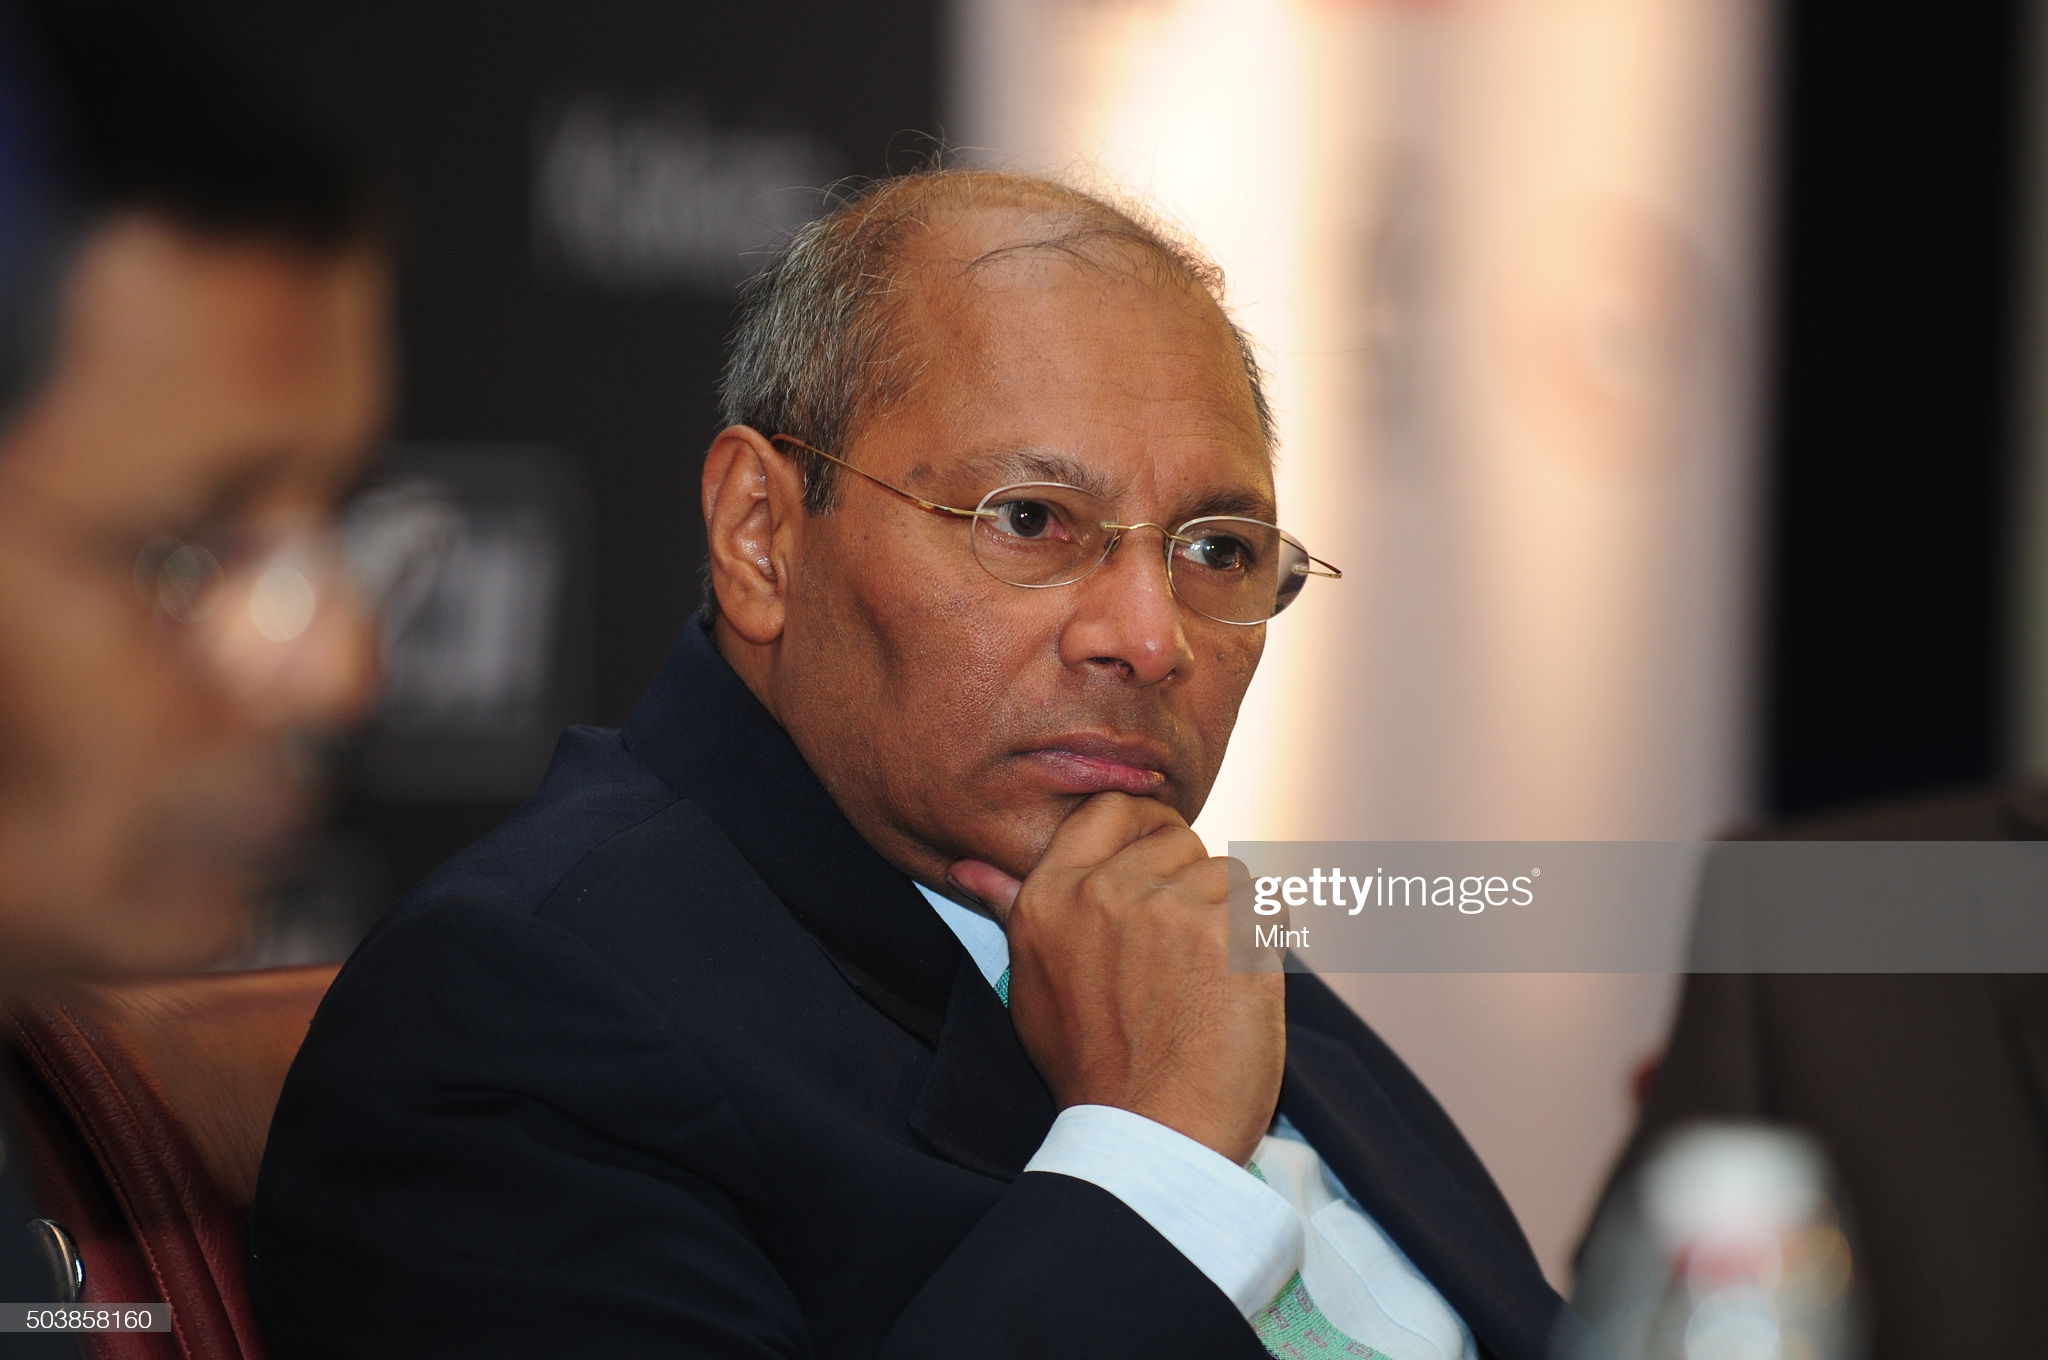 KOLKATA, INDIA - MARCH 20: Gautam Mukhopadhaya, Ambassador of India to Myanmar, during the Annual Regional Meeting and conference on Building East, Driving India by CII/ Confederation of India Industry at ITC Sonar on March 20, 2015 in Kolkata, India. (Photo by Indranil Bhoumik/Mint via Getty Images)